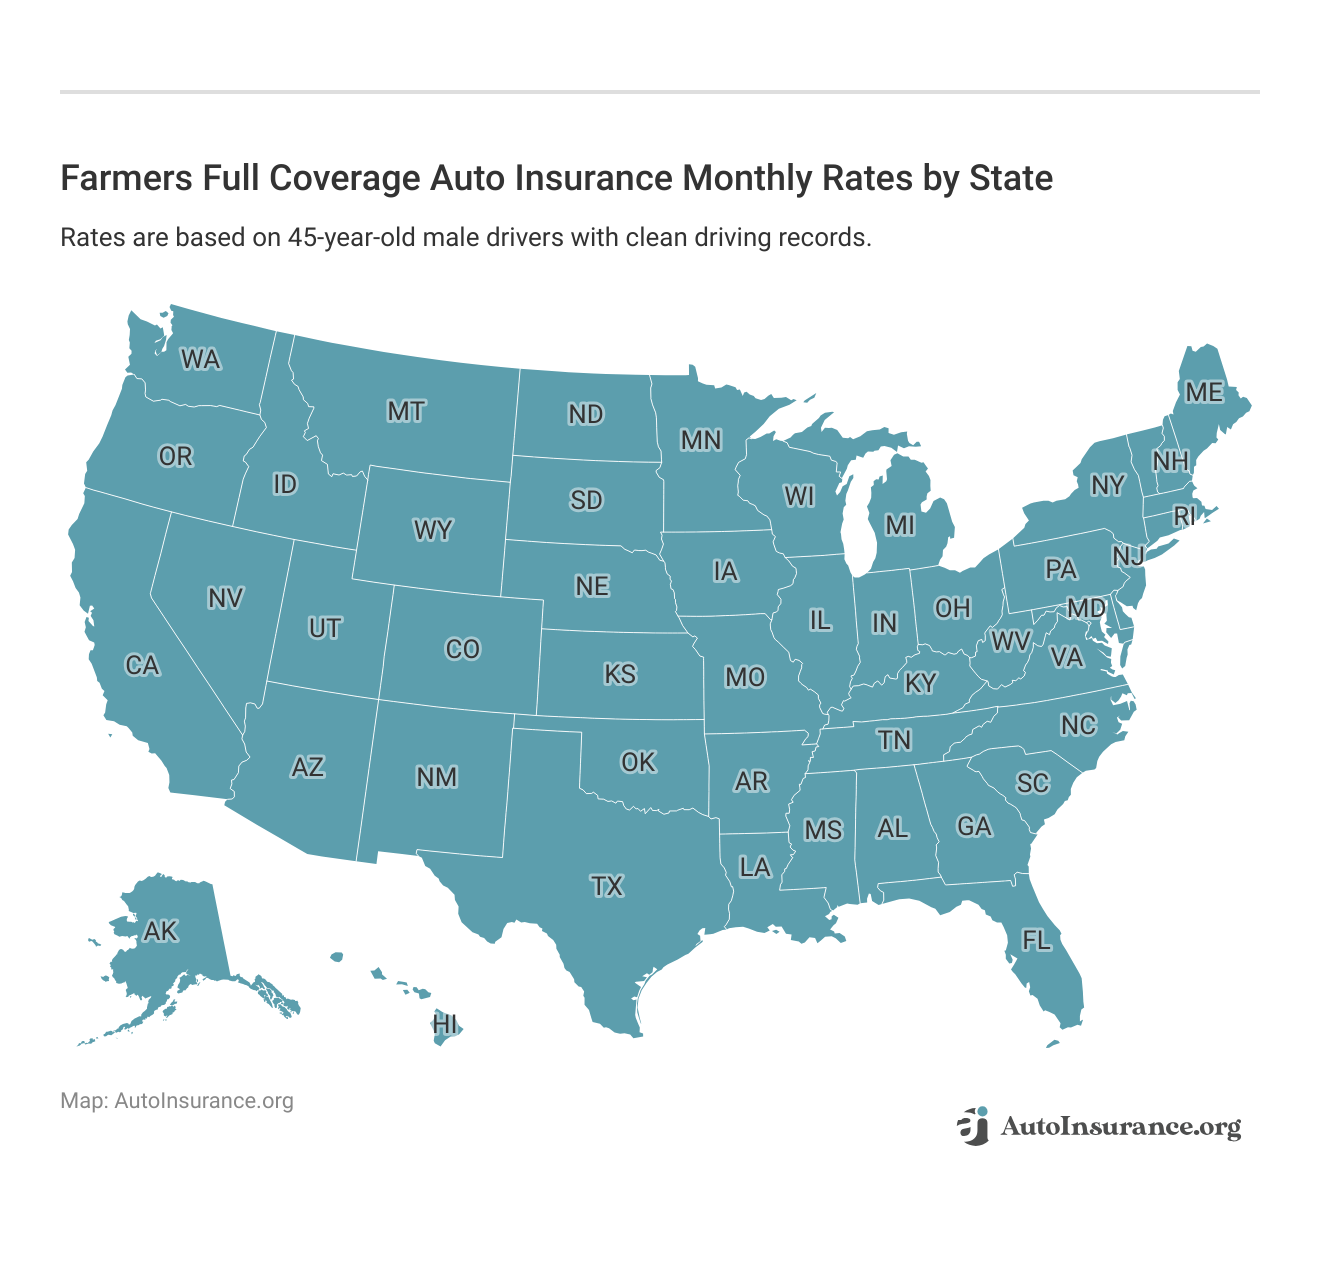 <h3>Farmers Full Coverage Auto Insurance Monthly Rates by State</h3>